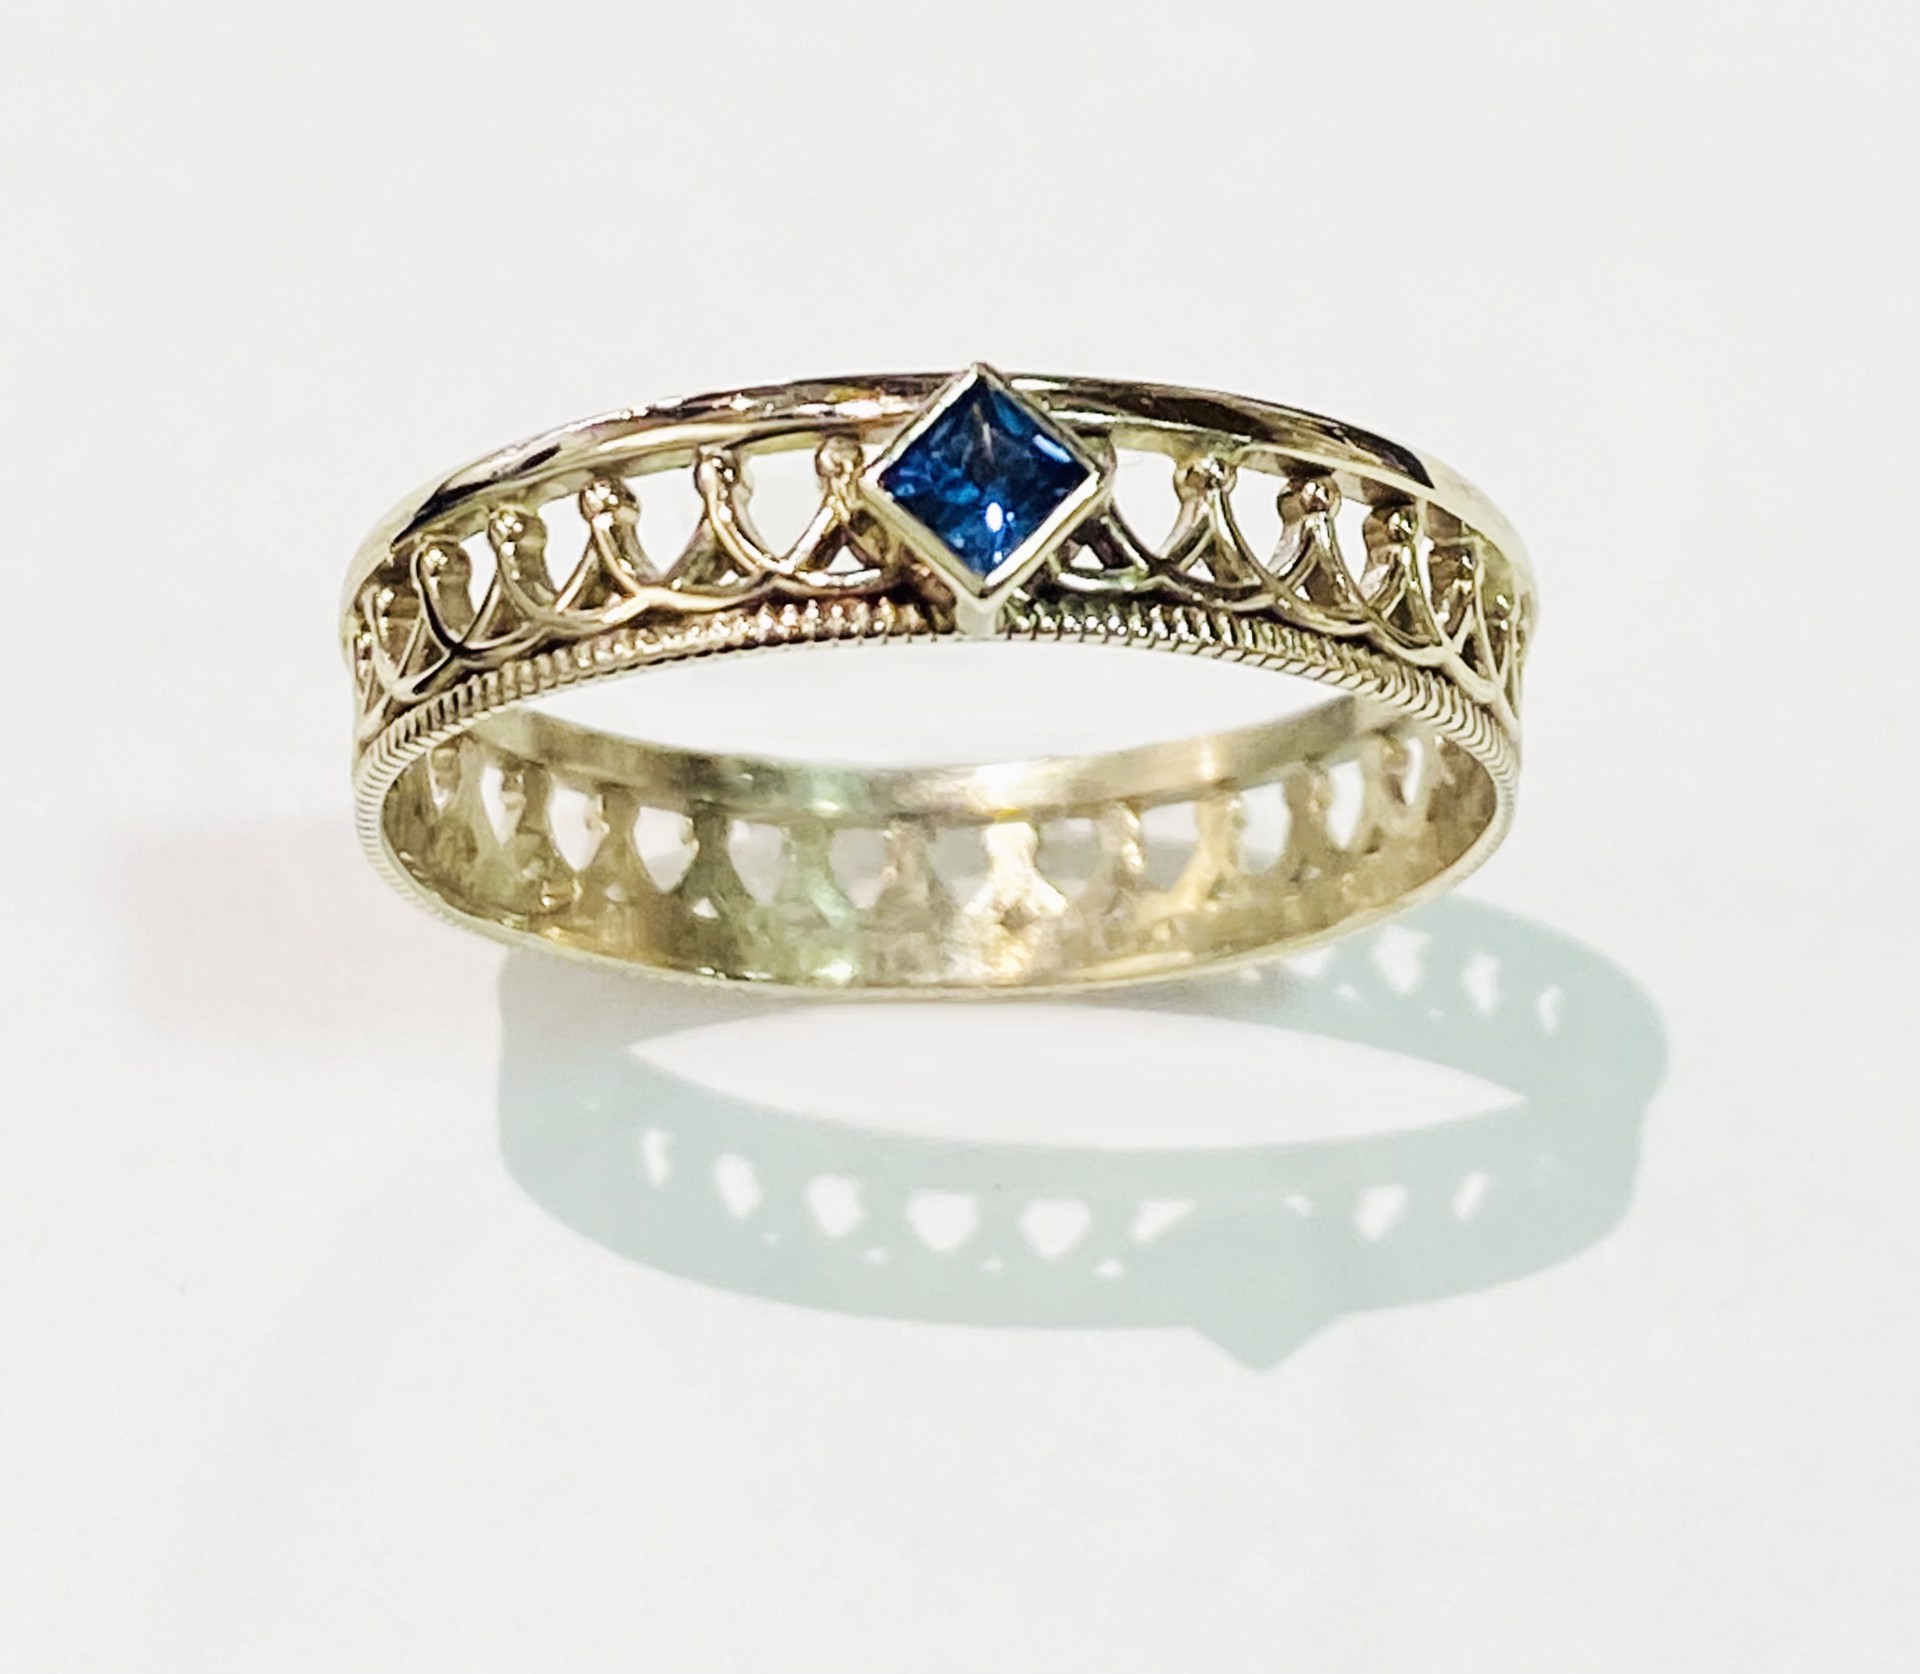 14K White Gold, Sapphire Crown Ring by D'ETTE DELFORGE